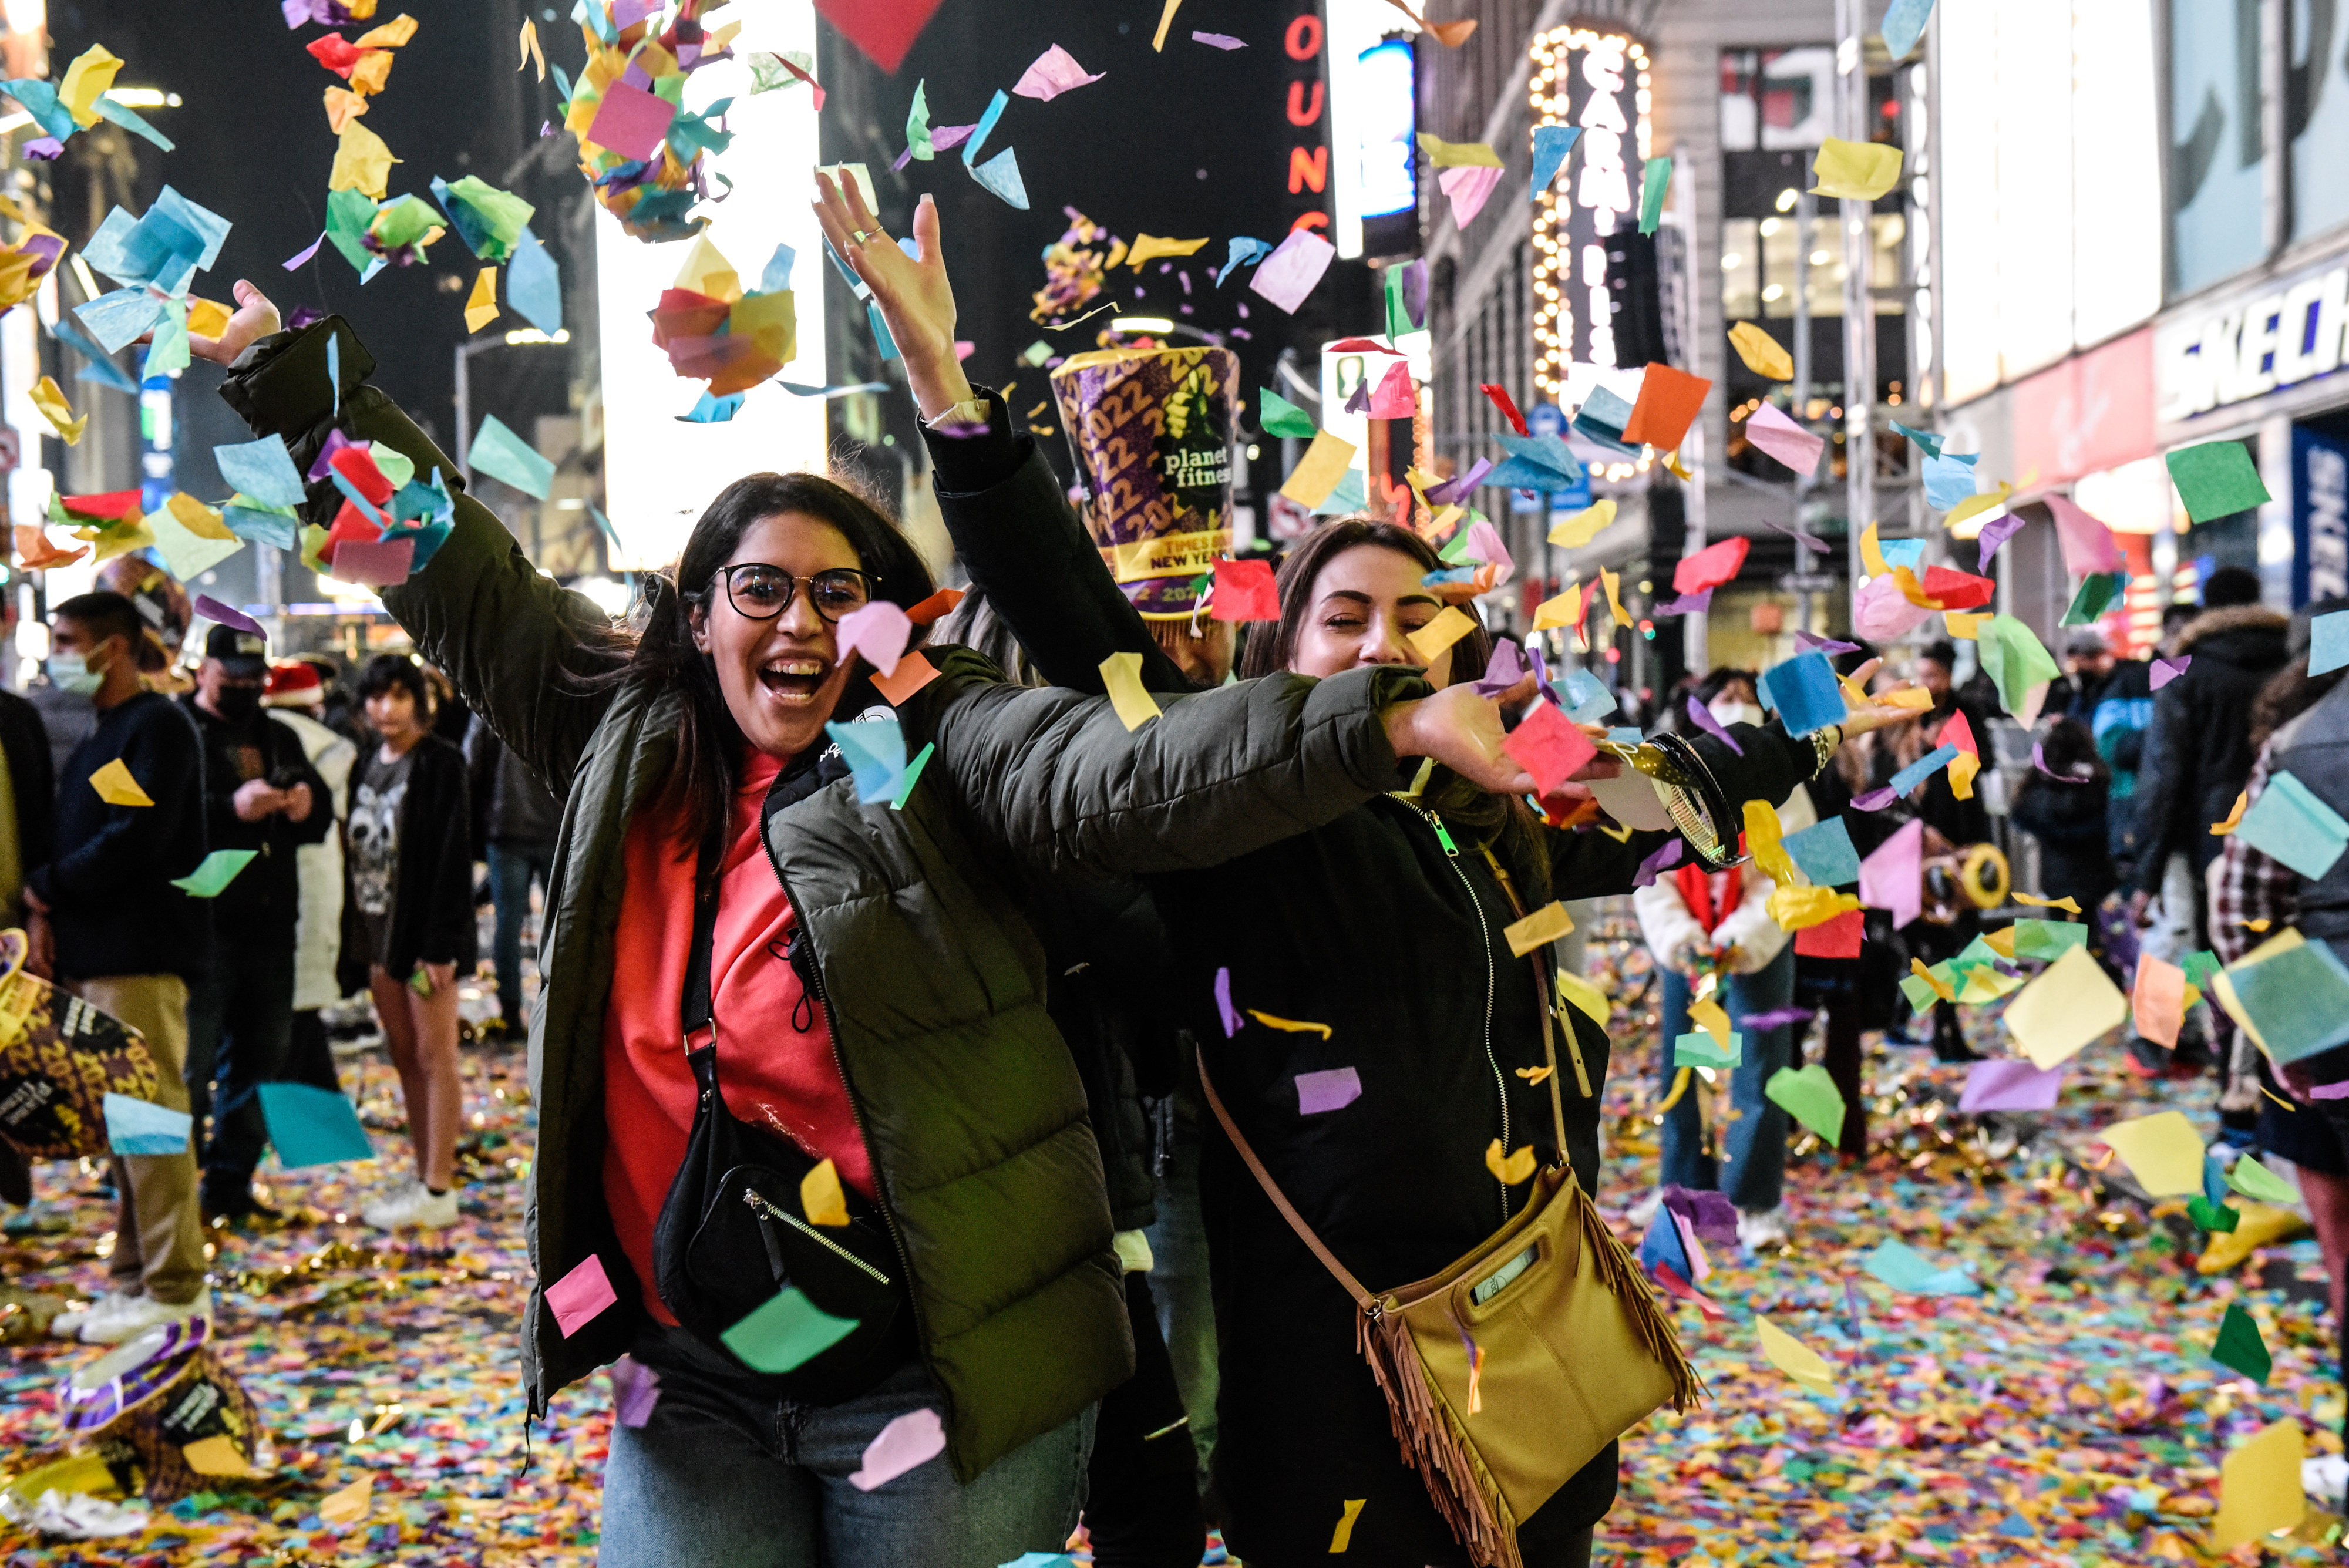 Times Square NYE Celebrations Return With Smaller Crowd For Vaccinated Revelers